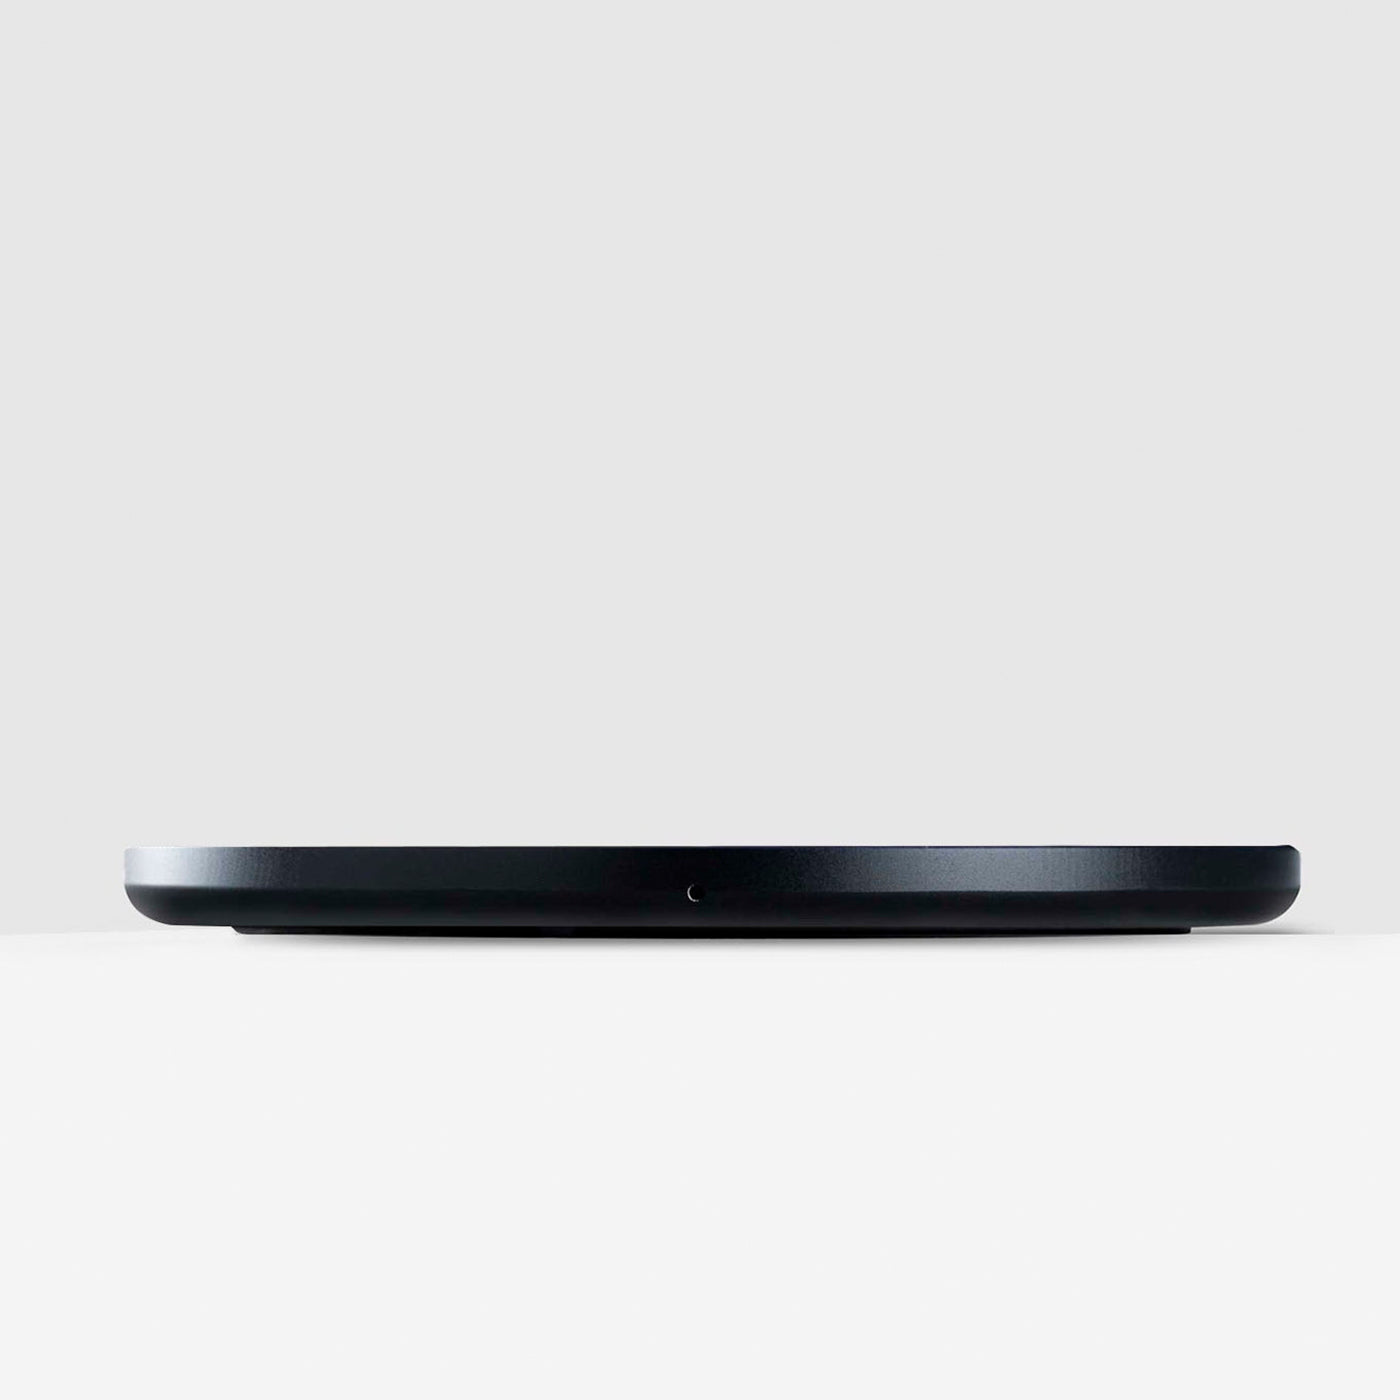 GRAY SHADE Solo Wireless Charger - Alternative view 2